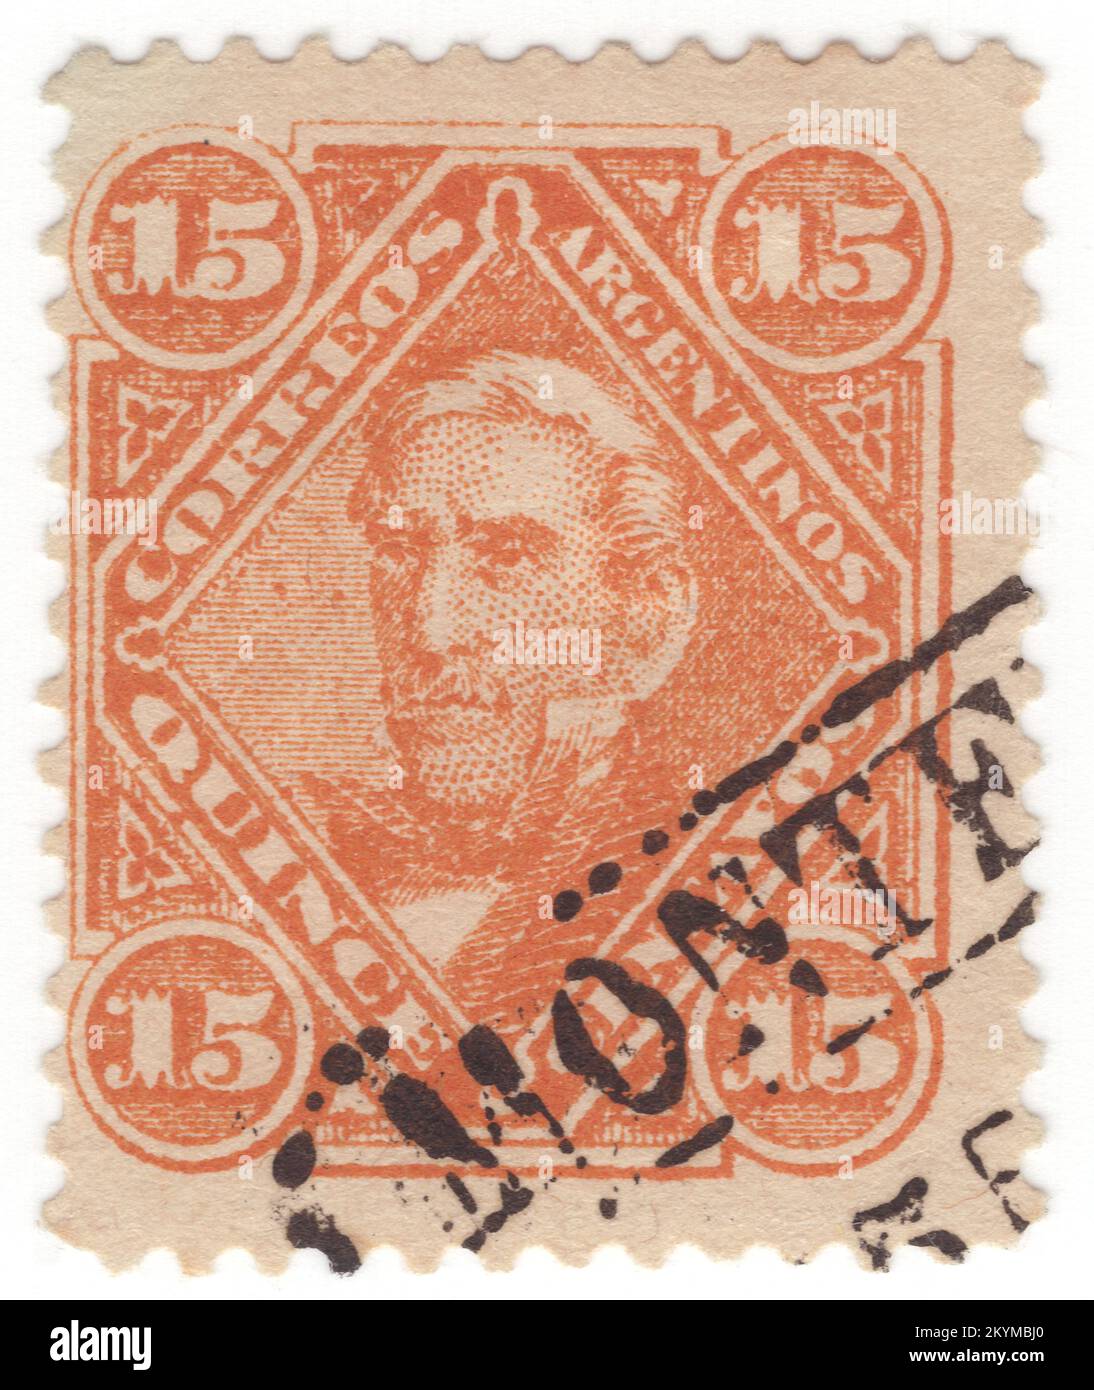 ARGENTINA - 1888: 15 centavos orange postage stamp depicting portrait of José de San Martín (Jose Francisco de San Martín y Matorras), known as the Liberator of Argentina, Chile and Peru. Argentine general and the primary leader of the southern and central parts of South America's successful struggle for independence from the Spanish Empire who served as the Protector of Peru. Born in Yapeyú, Corrientes, in modern-day Argentina, he left the Viceroyalty of the Río de la Plata at the early age of seven to study in Málaga, Spain Stock Photo